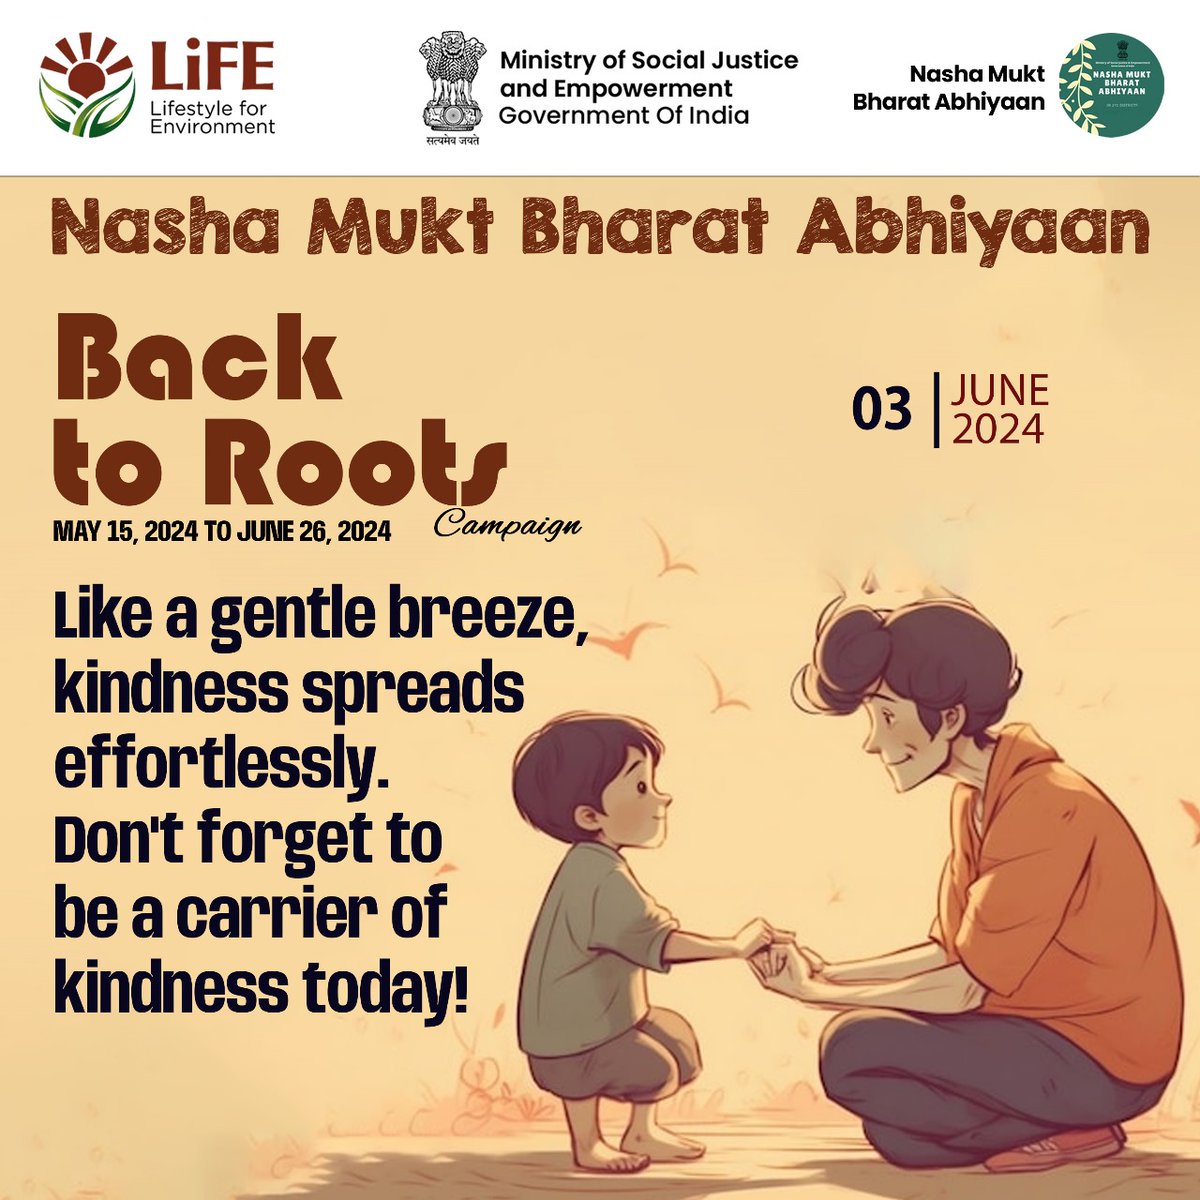 Nasha Mukt Bharat Abhiyaan brings 'Back to Roots Campaign' (15 May-26 June 2024) Remember that Kindness costs nothing, but means everything. @Drvirendrakum13 @MSJEGOI @HMOIndia @UNODC @NITIAayog @_saurabhgarg @SMILE_MoSJE #nmba #drugfreeindia